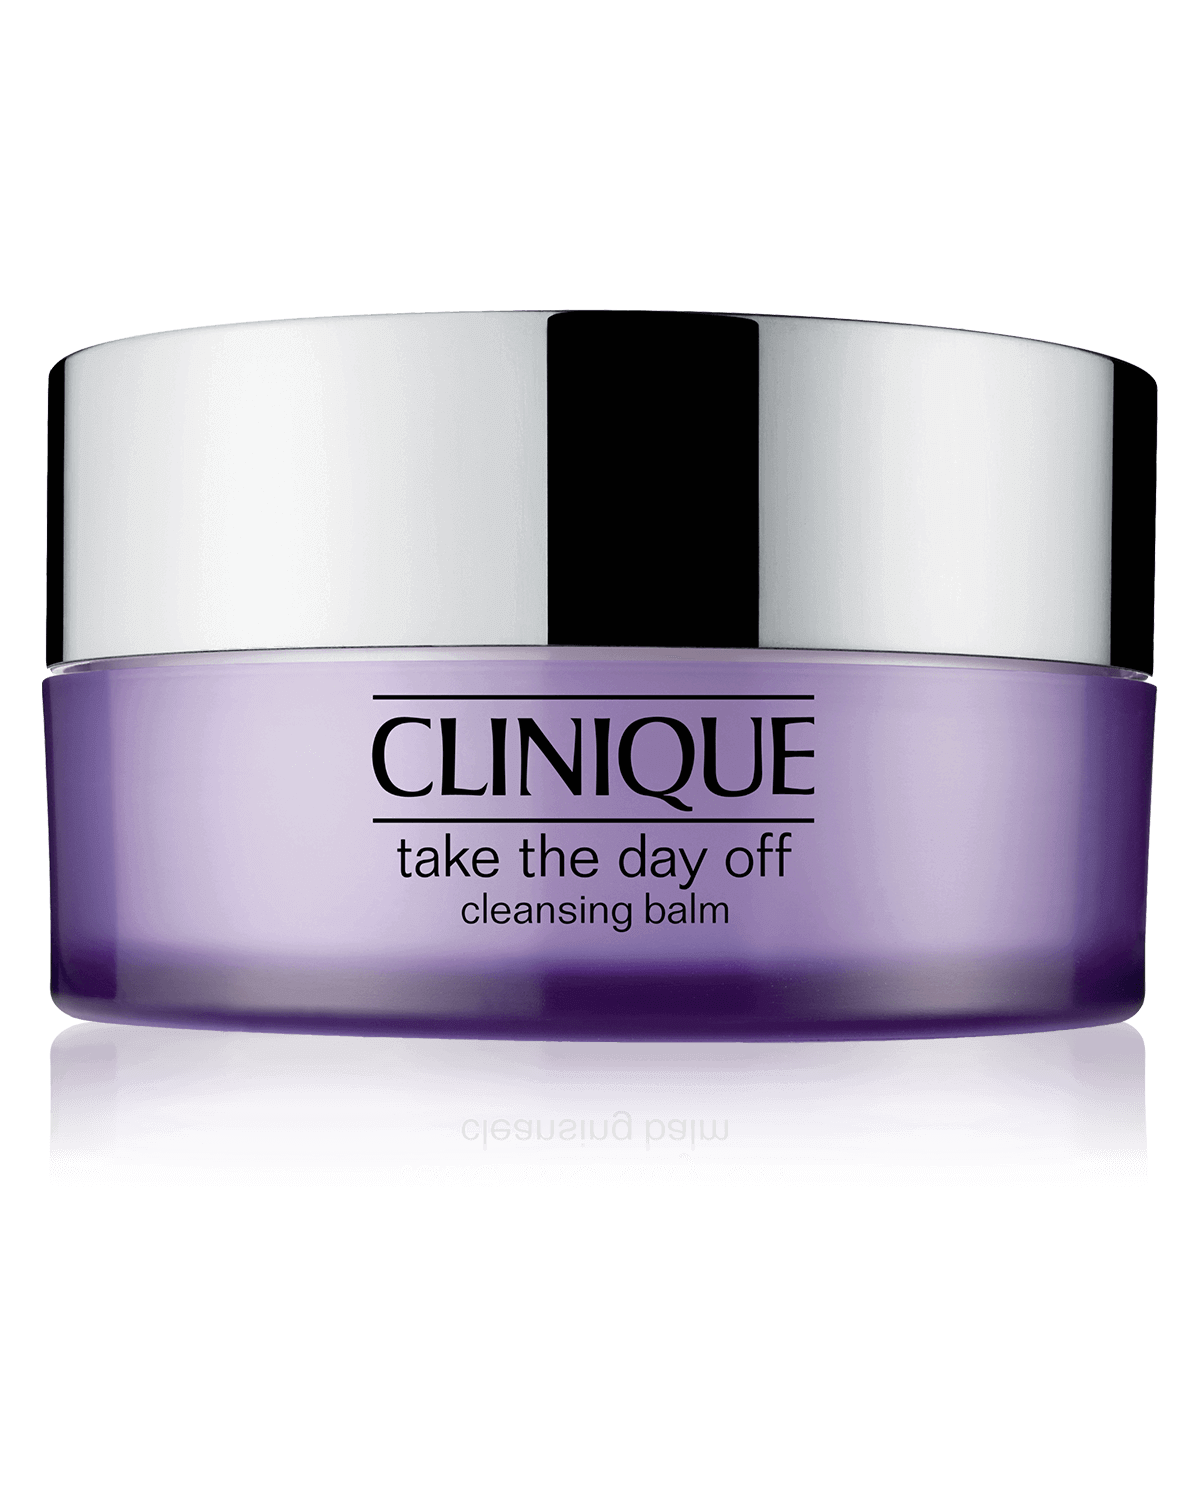 Take The Day Off™ Baume Démaquillant